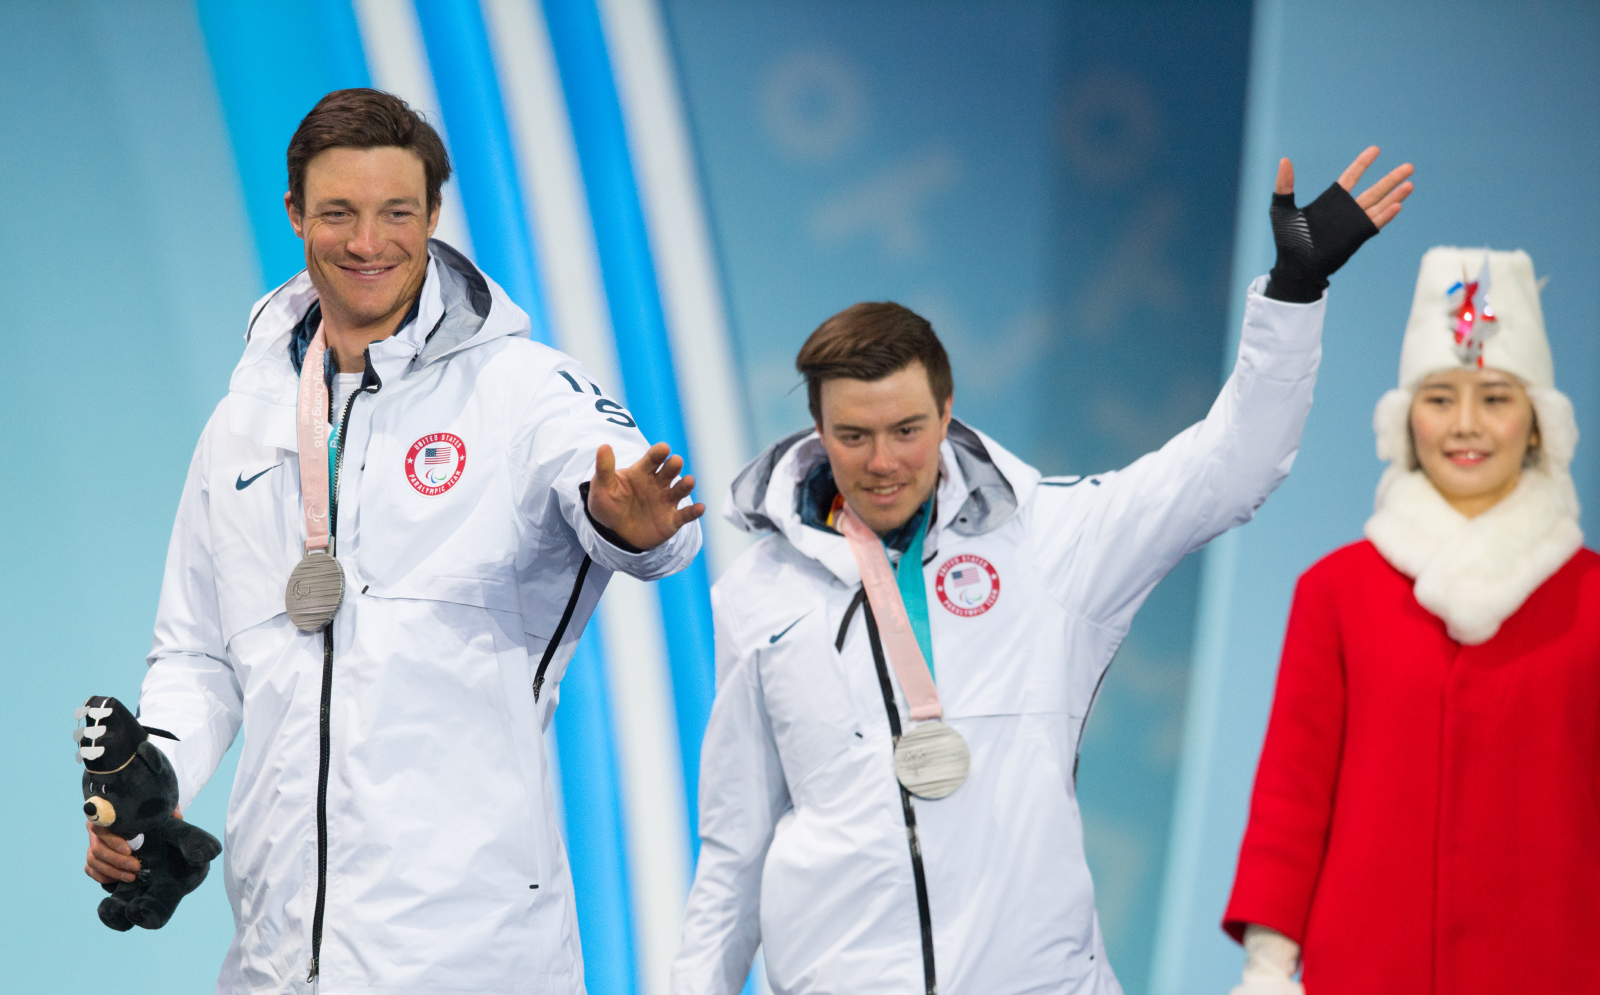 Jacob (right) and guide Sawyer Kesselheim (left), at the medal ceremony for the Men's 2018 Paralympic 10 kilometer, Visually Impaired, Cross Country Skiing. They are standing side by side, smiling, waving, with silver medals around their necks. They're wearing long, white Team USA jackets, and both holding a stuffed bear, the Pyeongchang Paralympic mascot named “Bandabi.” In the background stands one of the ceremonies medal hosts, wearing a red overcoat, white fur scarf and white hat. 